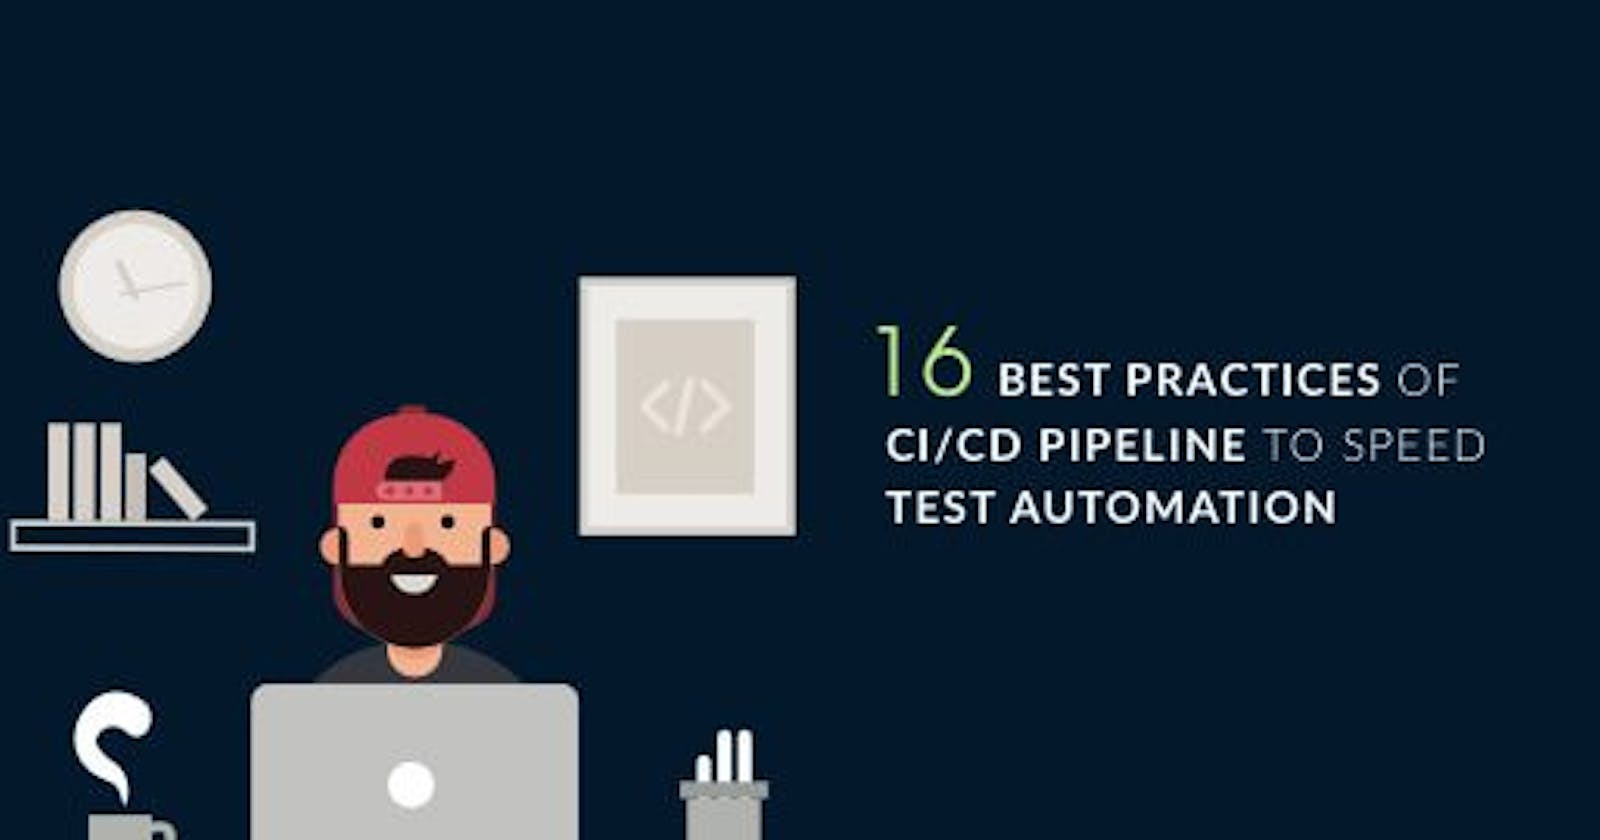 16 CI/CD Best Practices To Speed Test Automation Pipeline